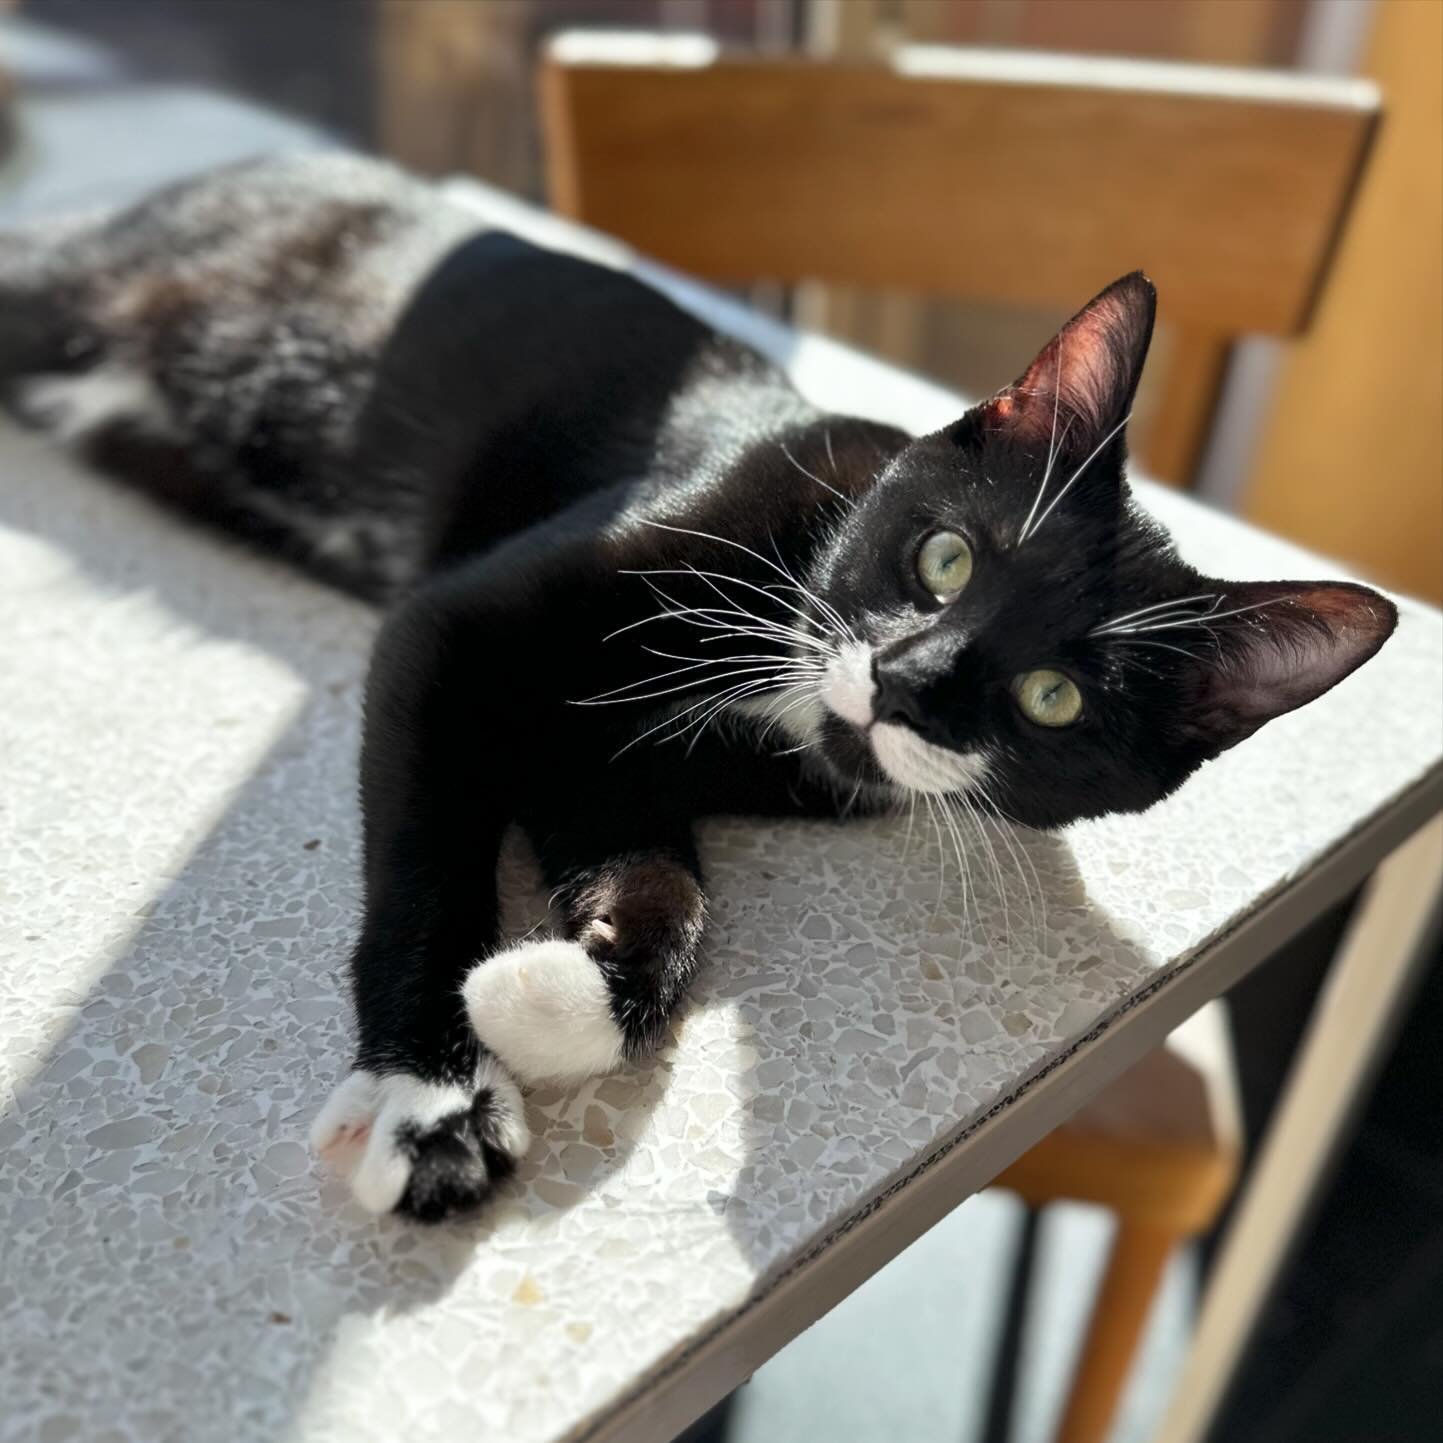 Donny is probably the funniest cat in the Cat Zone at the moment. His play antics with his sister, Marie, are outrageous, and he would like to be adopted with her so that they can be playmates for life. And would you just take a gander at his perfect